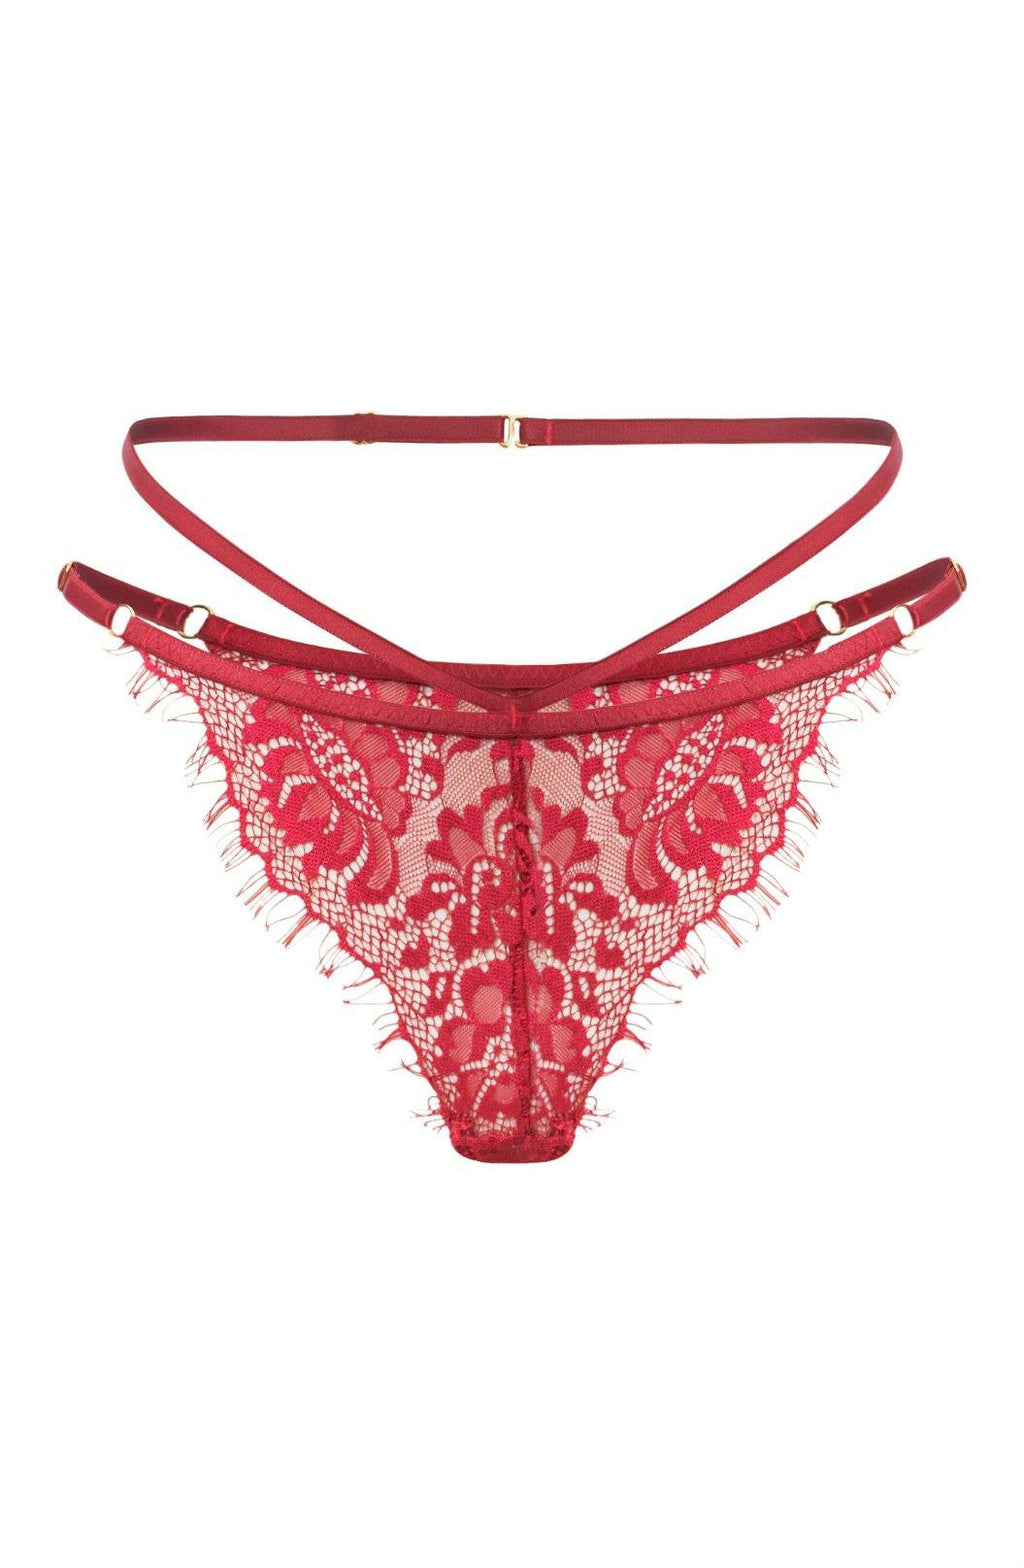 Confidante Forever Young  Thong  Alterego's TOP Valentine's Gifts!, Bedroom Wear, Brands, Briefs & Thongs, CHRISTMAS, Confidanté, Everyday, NEWLY-IMPORTED, Thongs, Valentine, Valentines - So